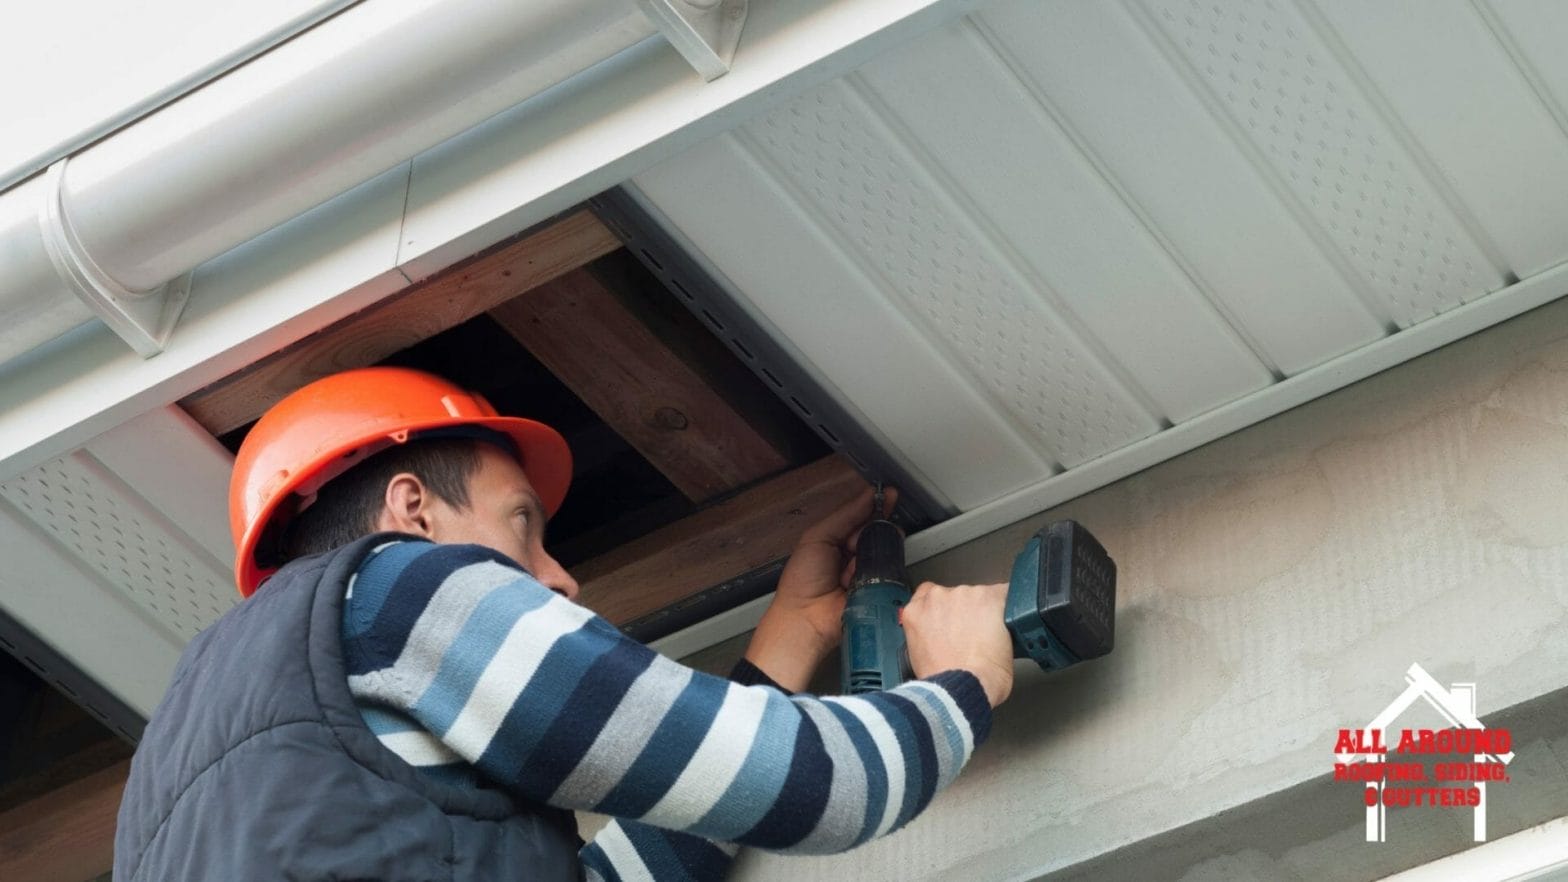 How Many Soffit Vents Will Improve Your Home’s Ventilation?